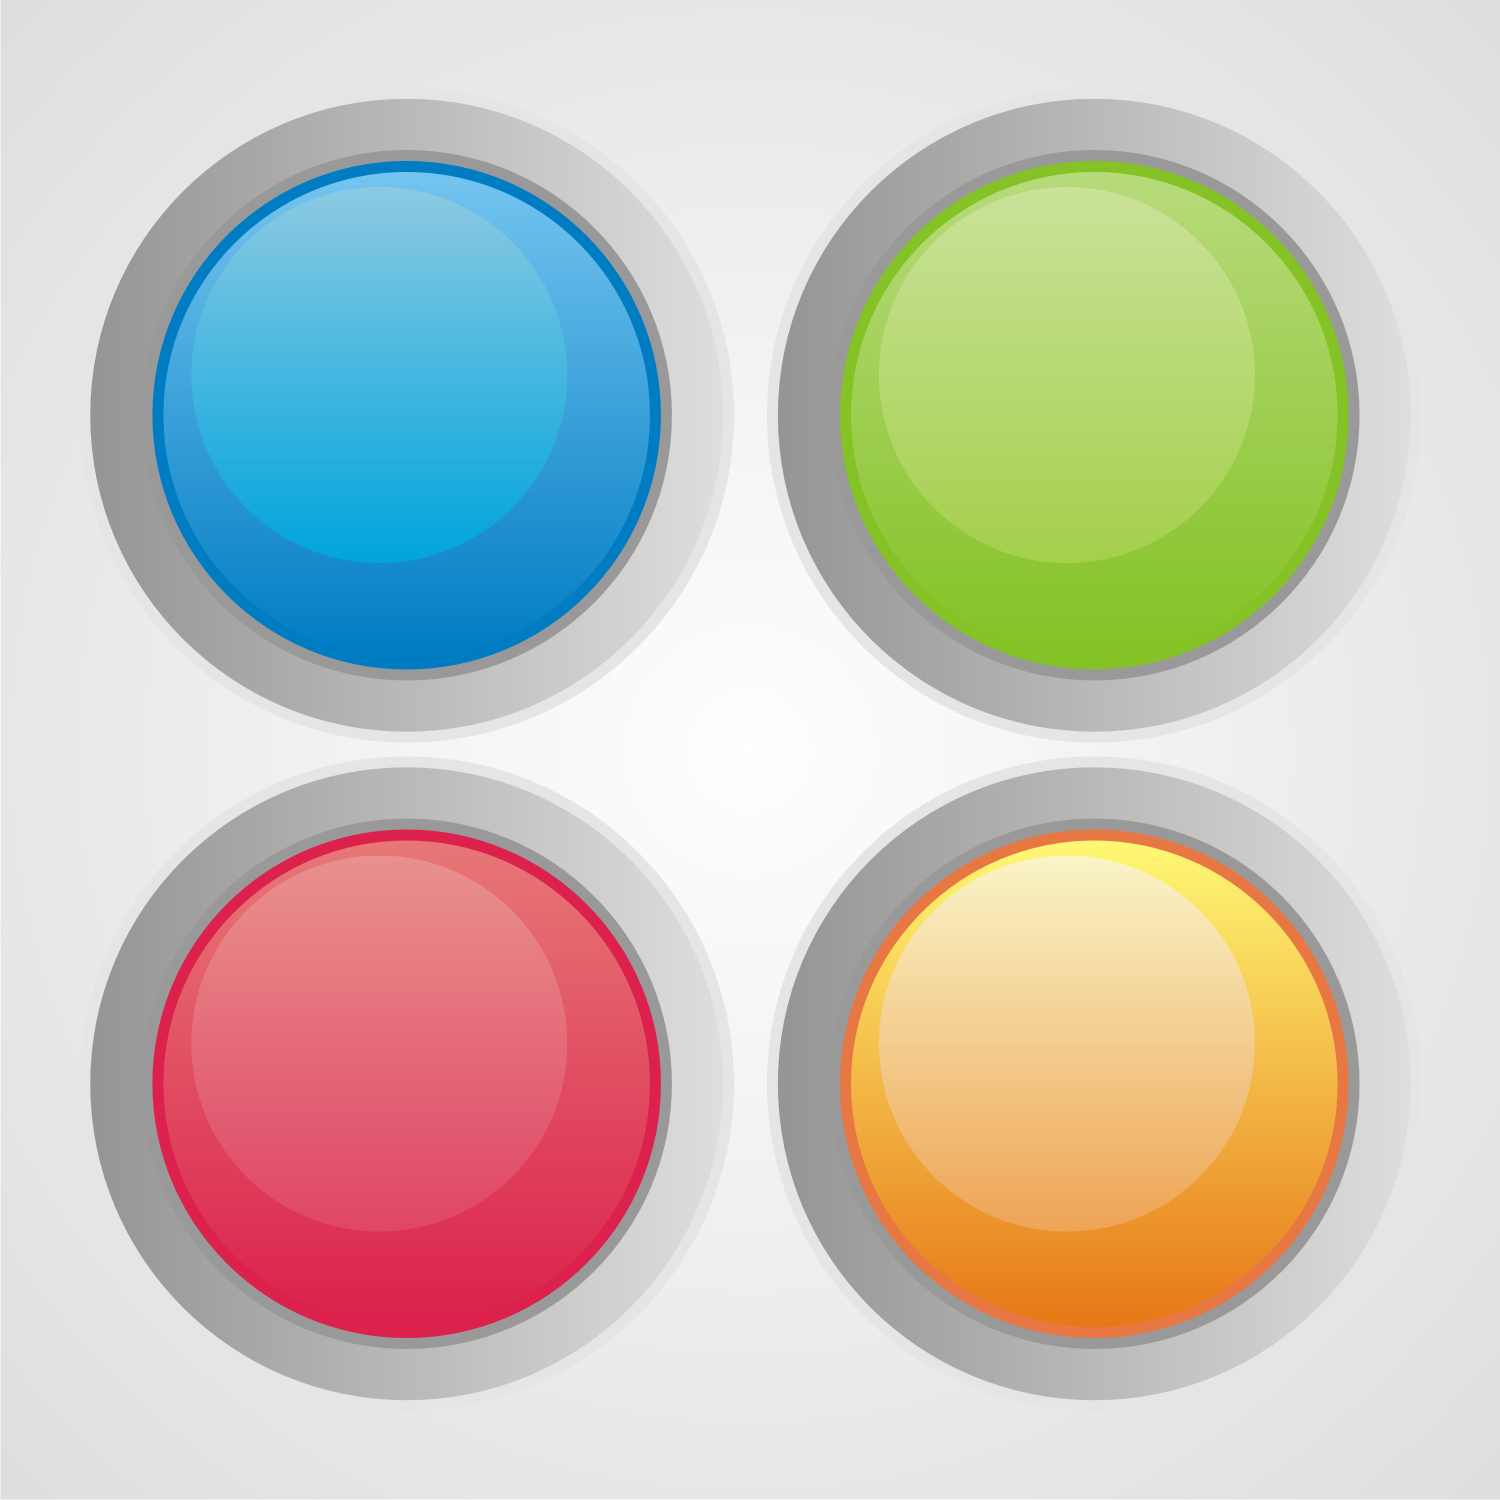 Download Vector for free use: Colorful web buttons